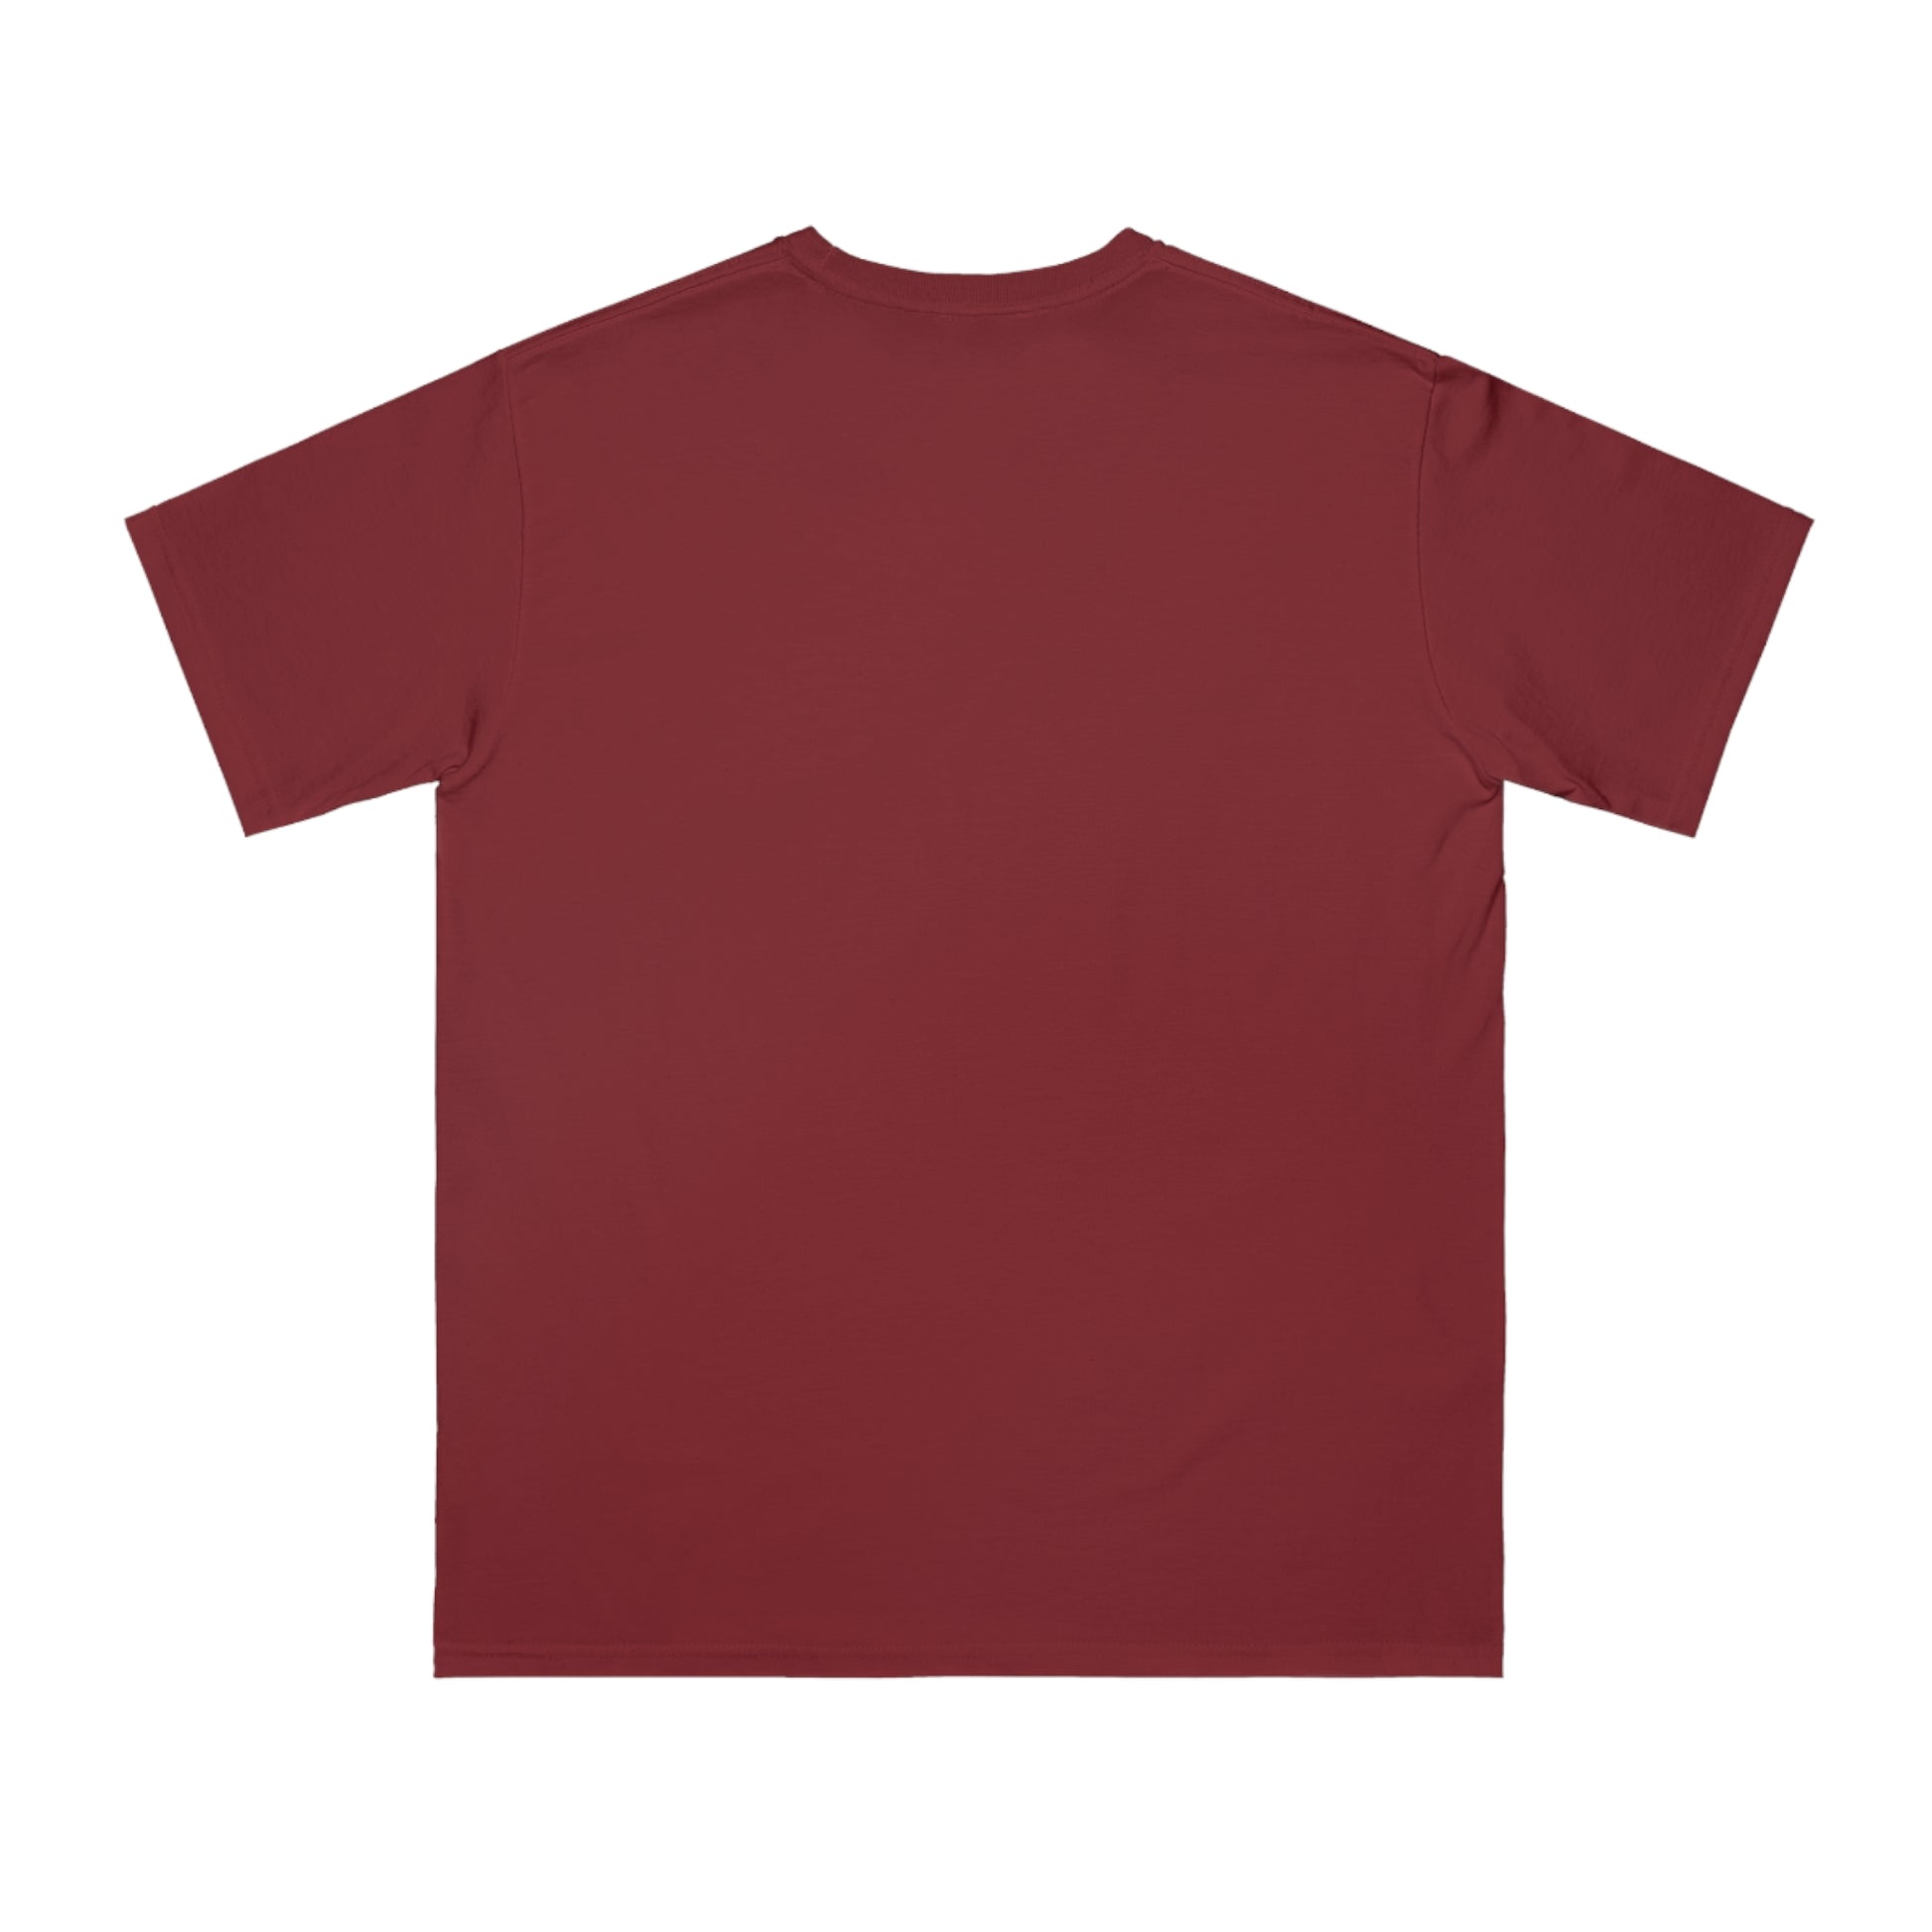 a red t - shirt with a white background